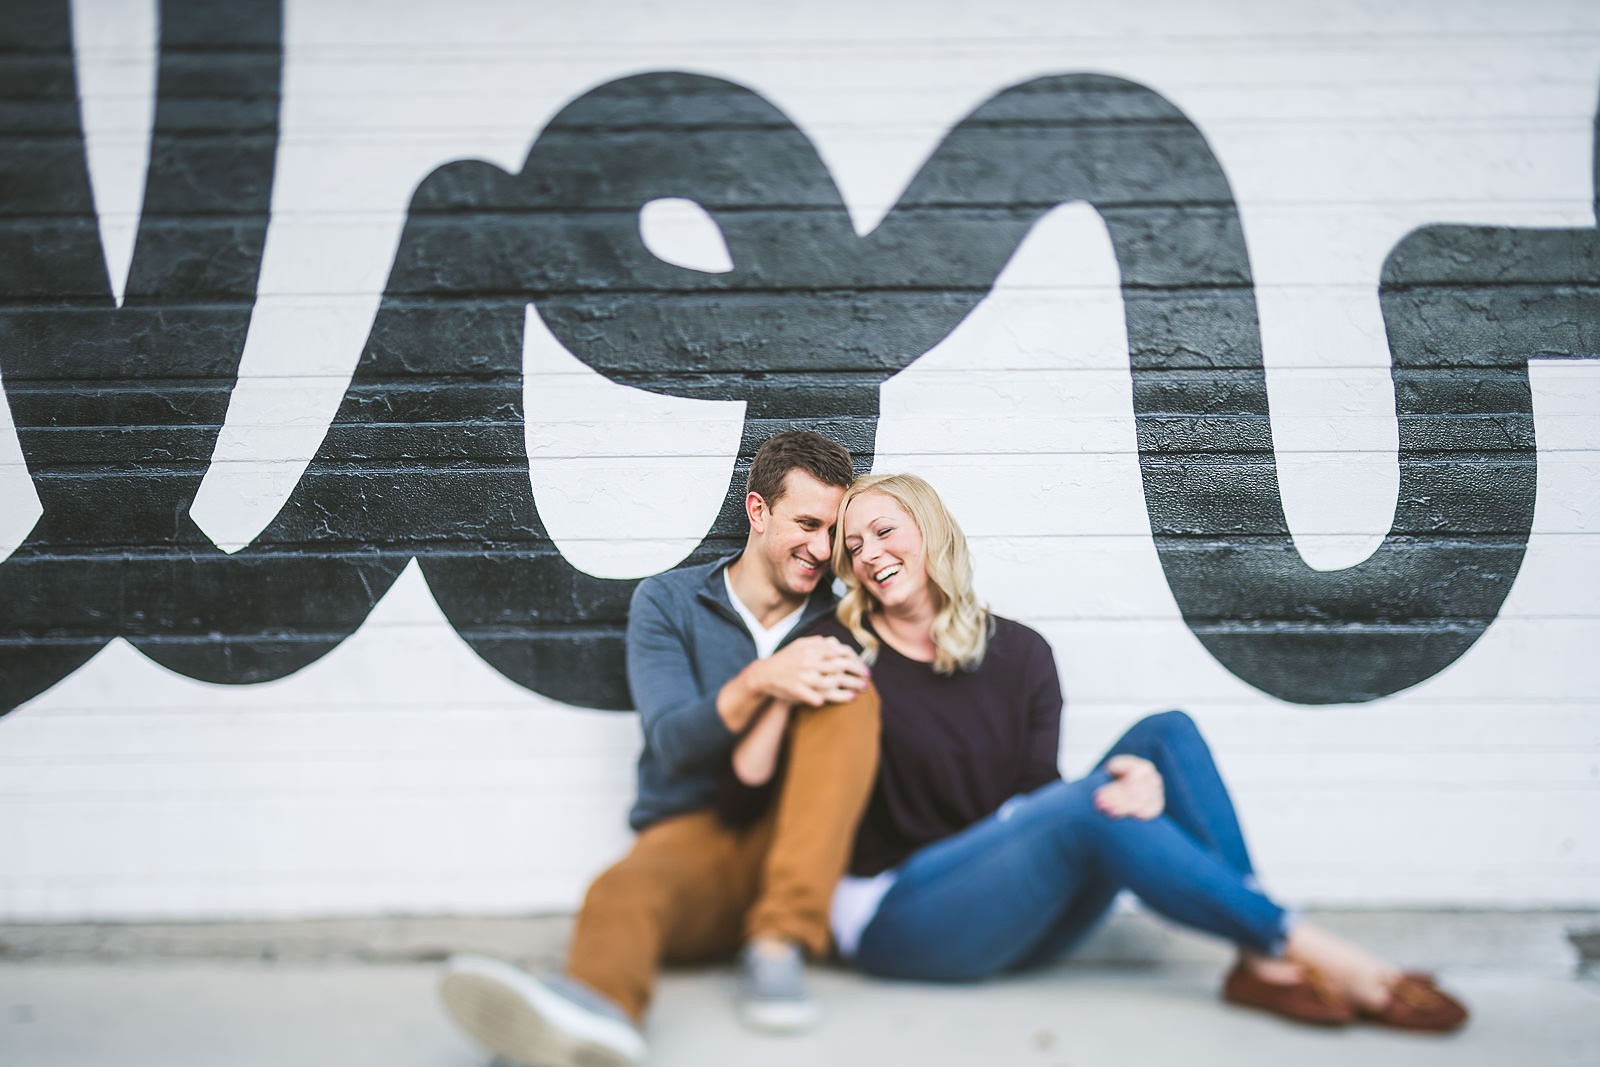 10 wicker park engagement photos - Chicago In-home Engagement Sessions // Jessica + Bill